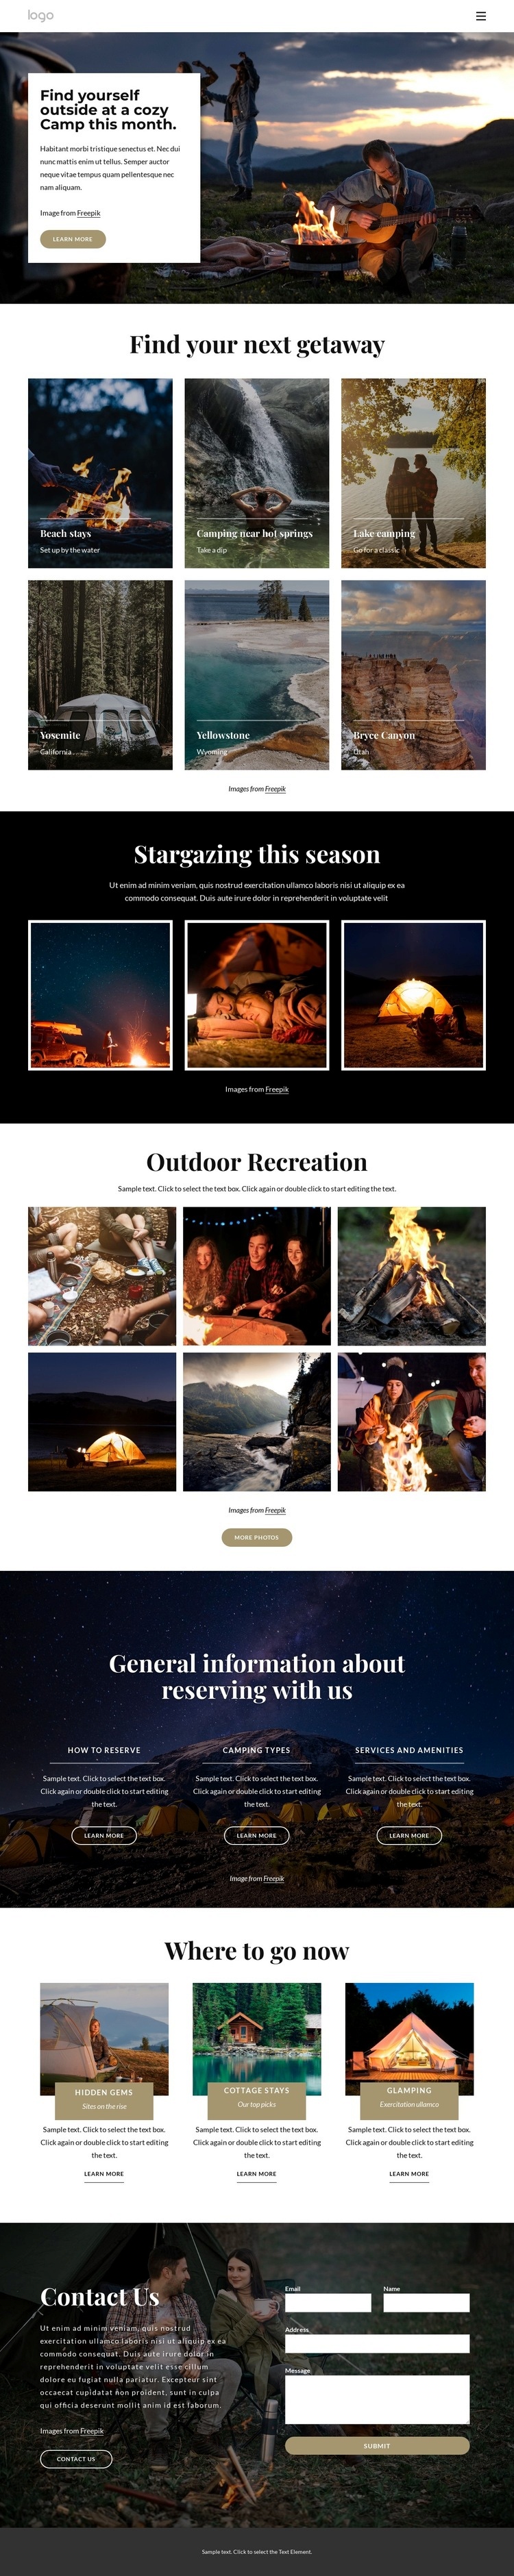 Going on a camping trip Webflow Template Alternative